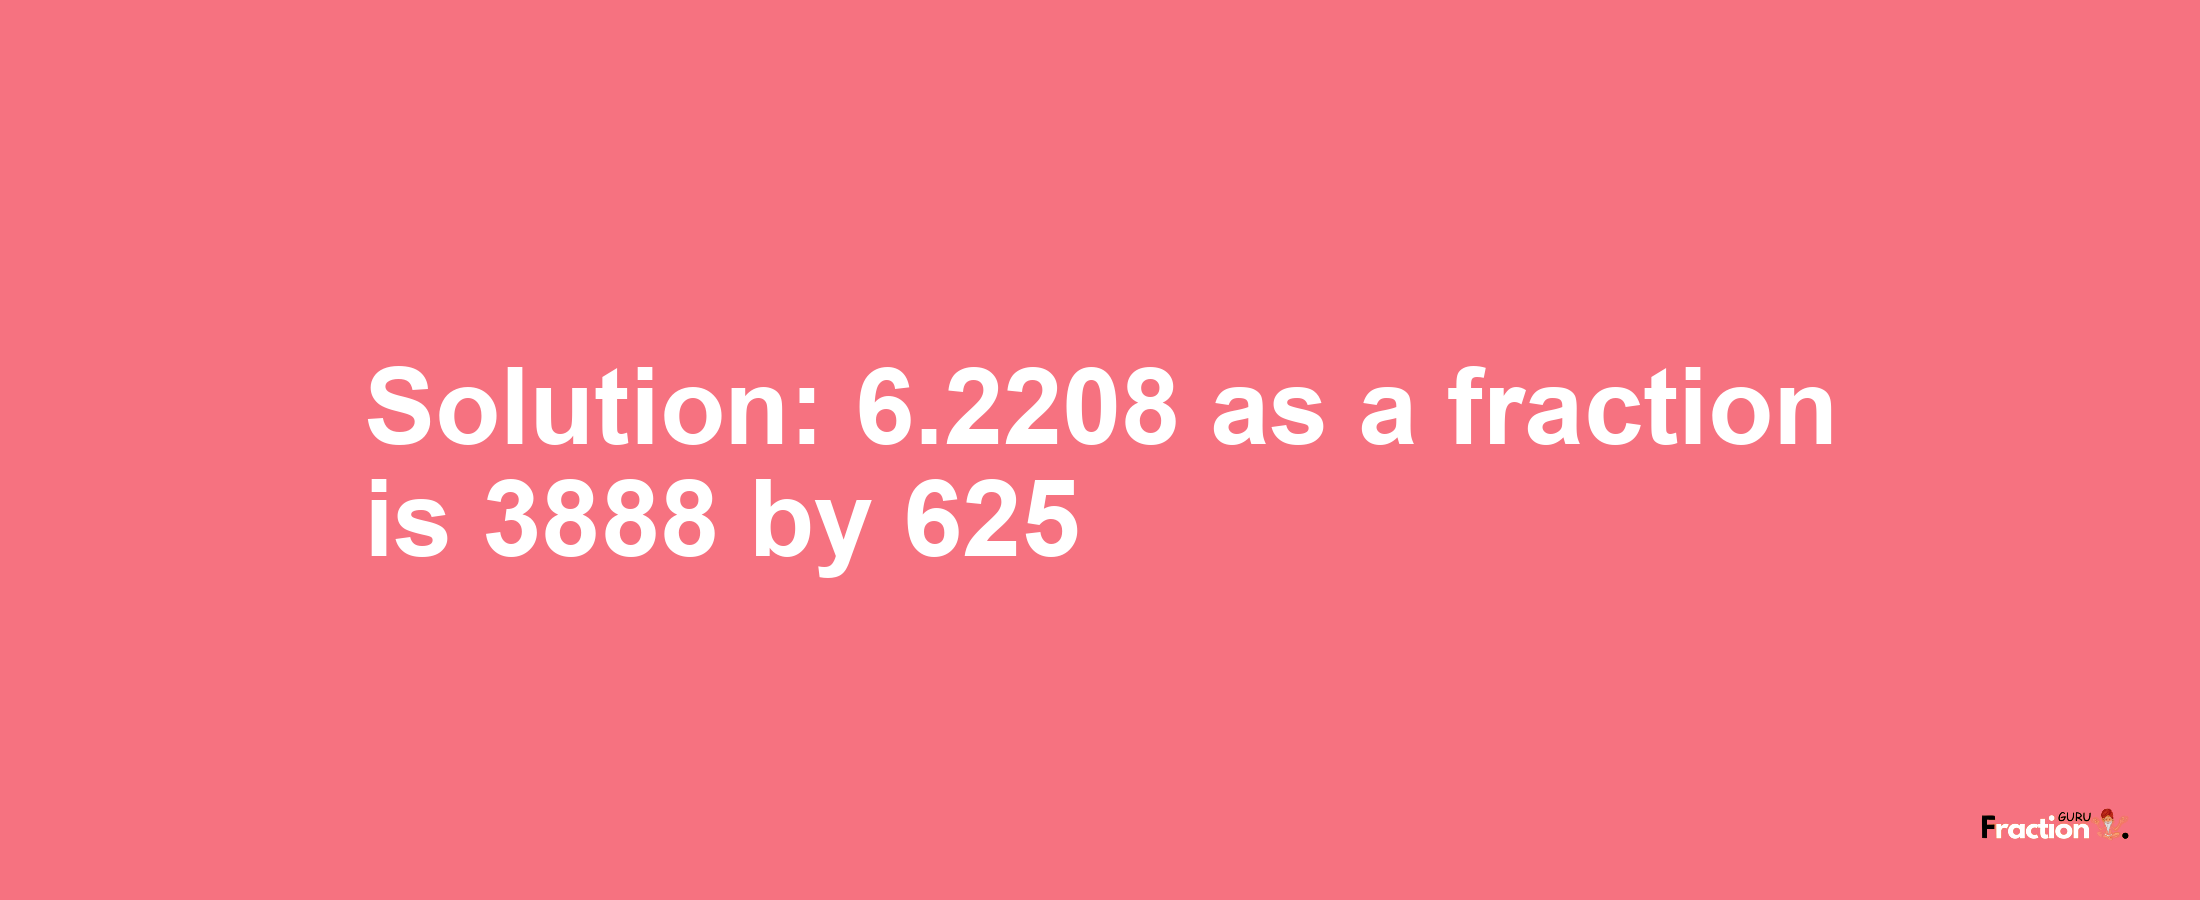 Solution:6.2208 as a fraction is 3888/625